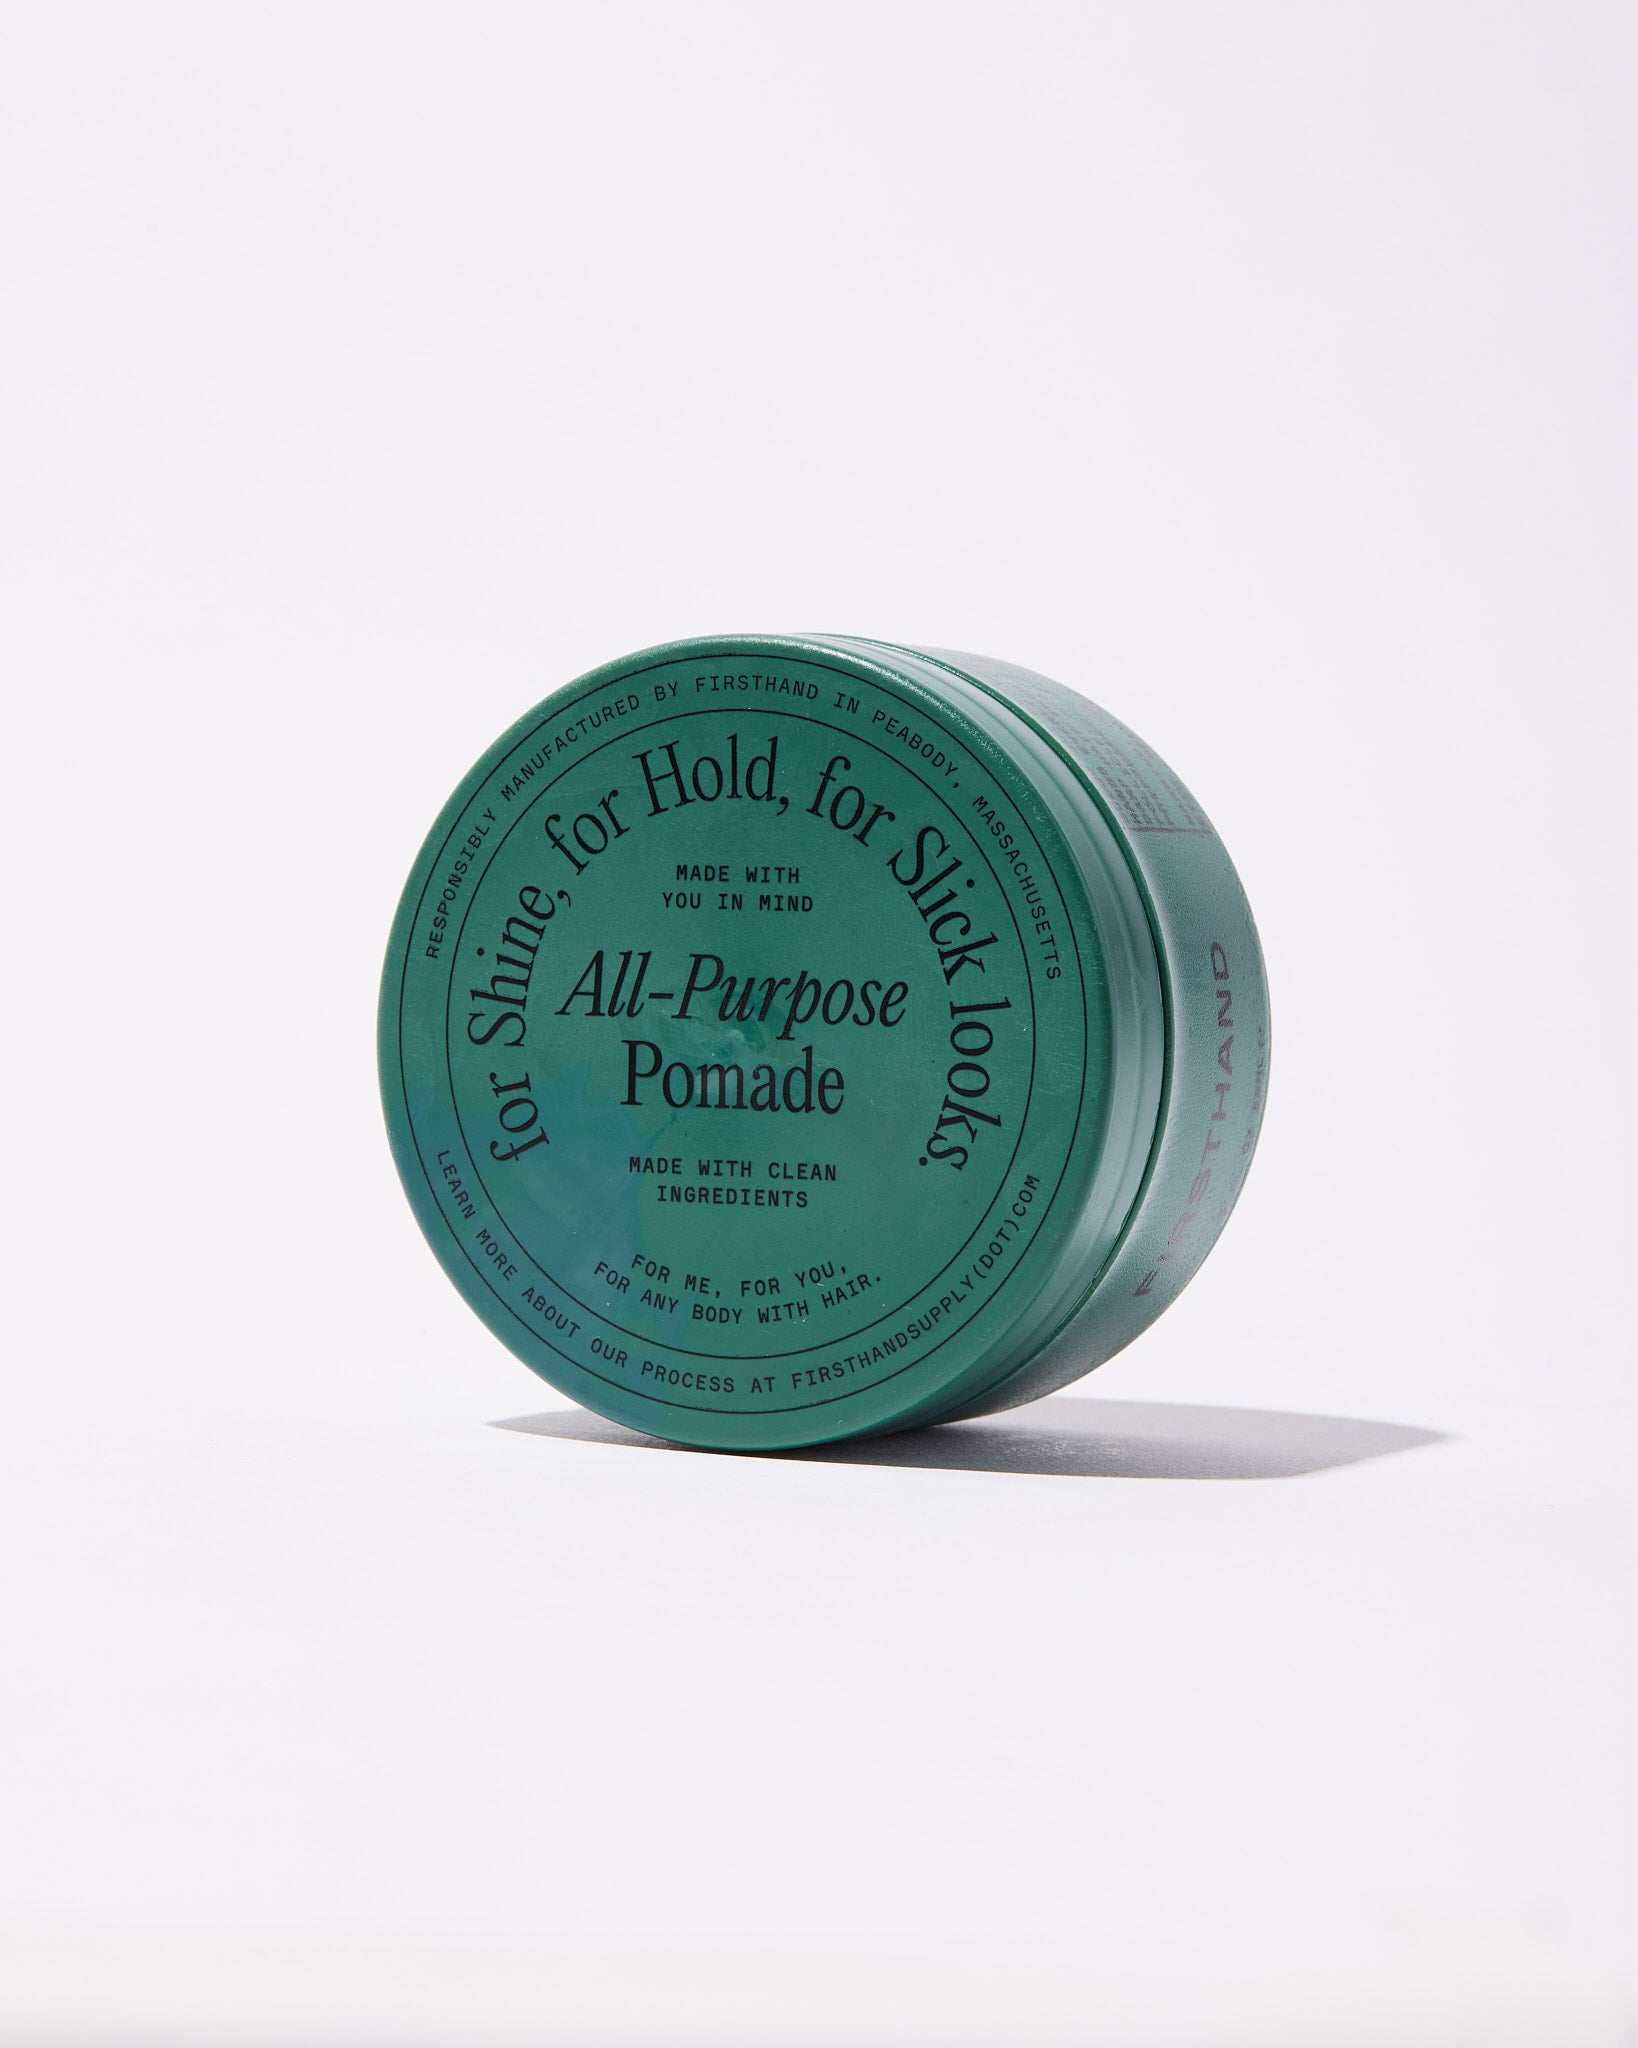 All-Purpose Pomade (Case of 12)